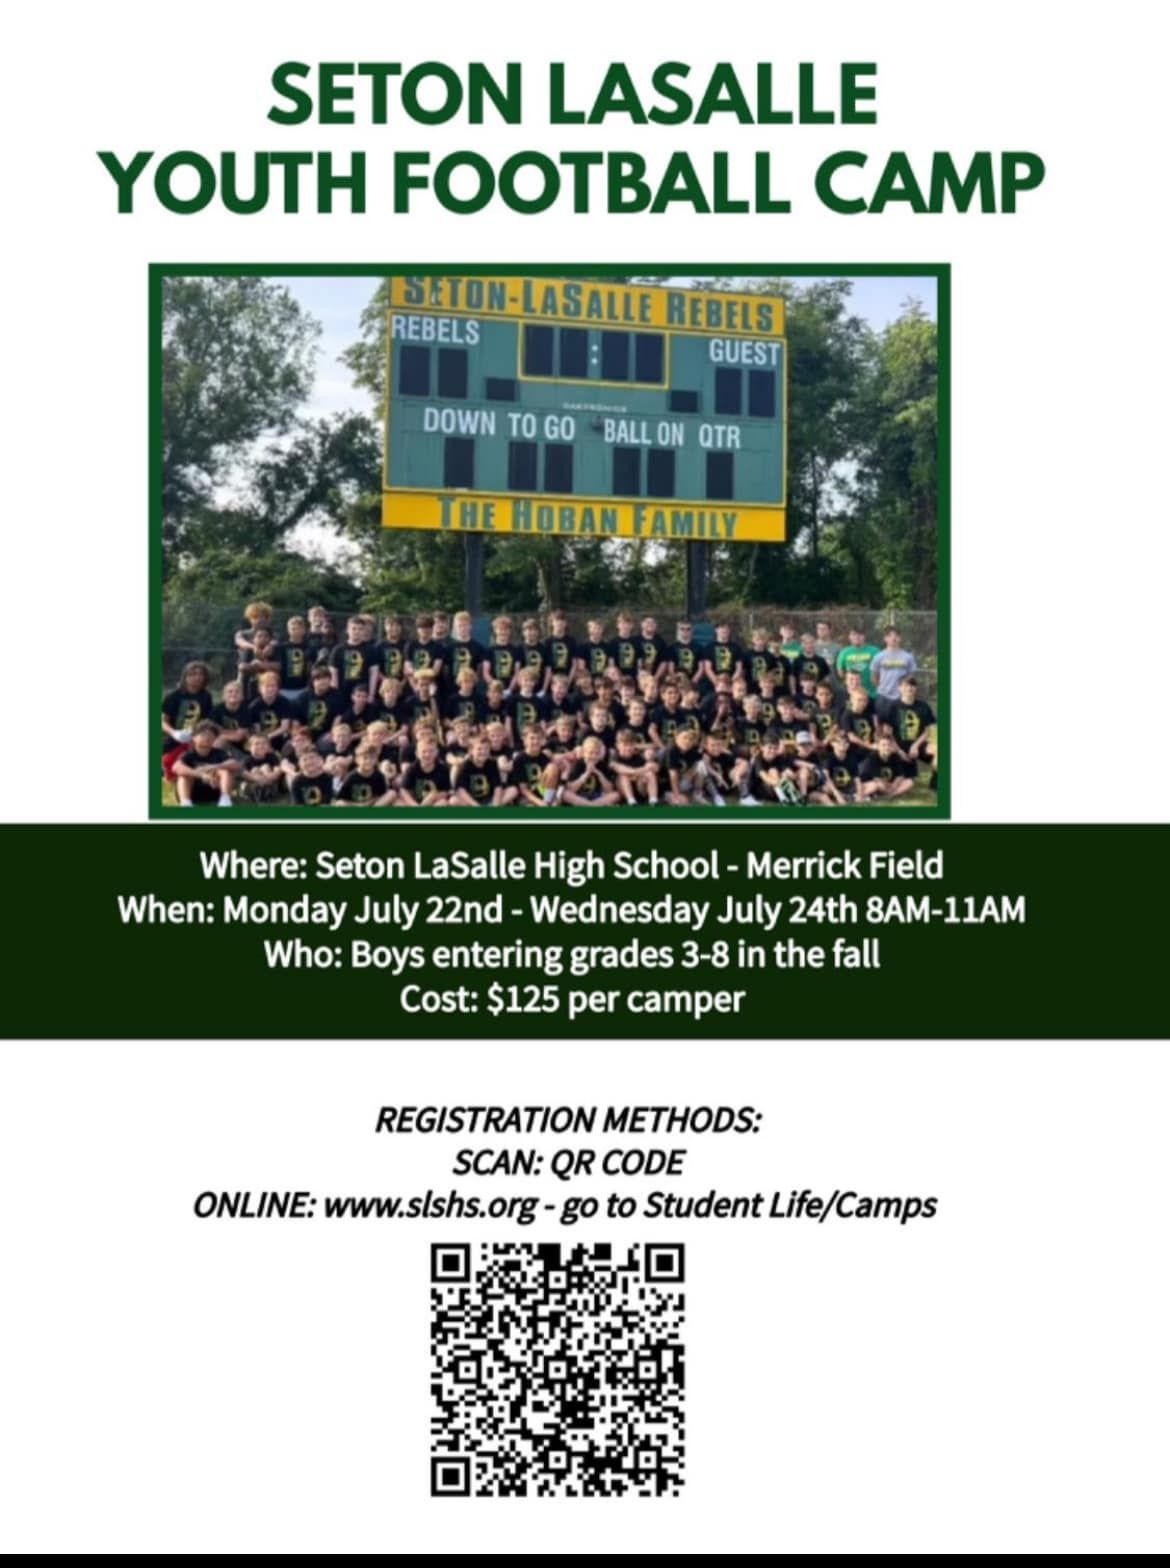 Seton LaSalle Youth Football Camp in Pittsburgh